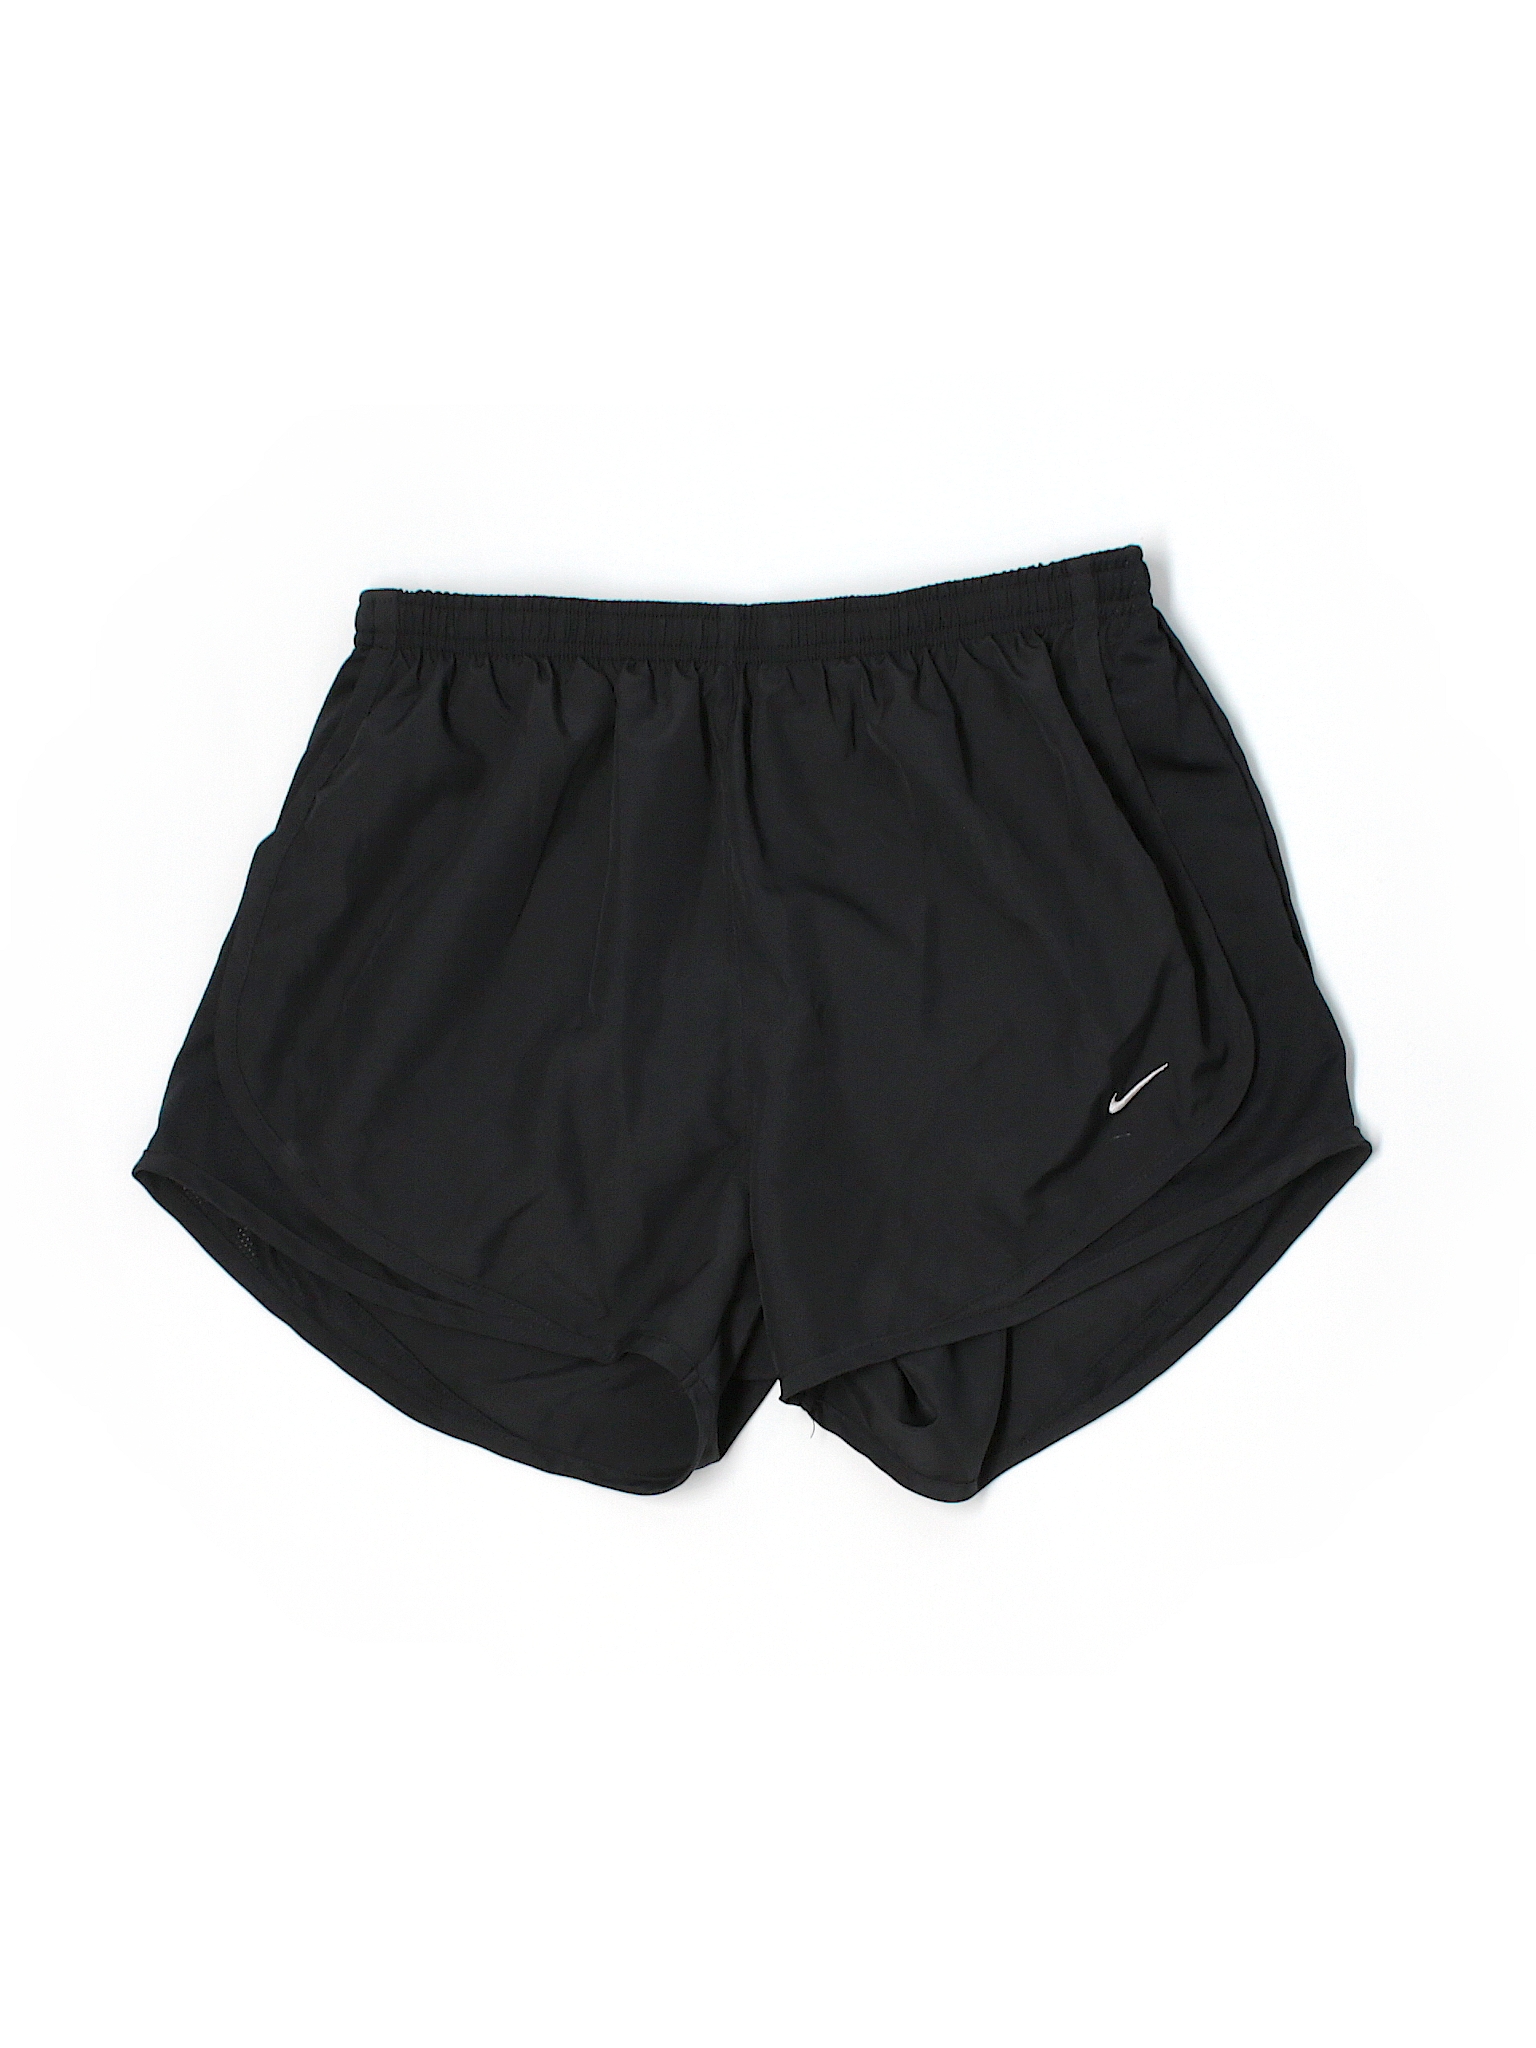 Nike Athletic Shorts - 61% off only on thredUP